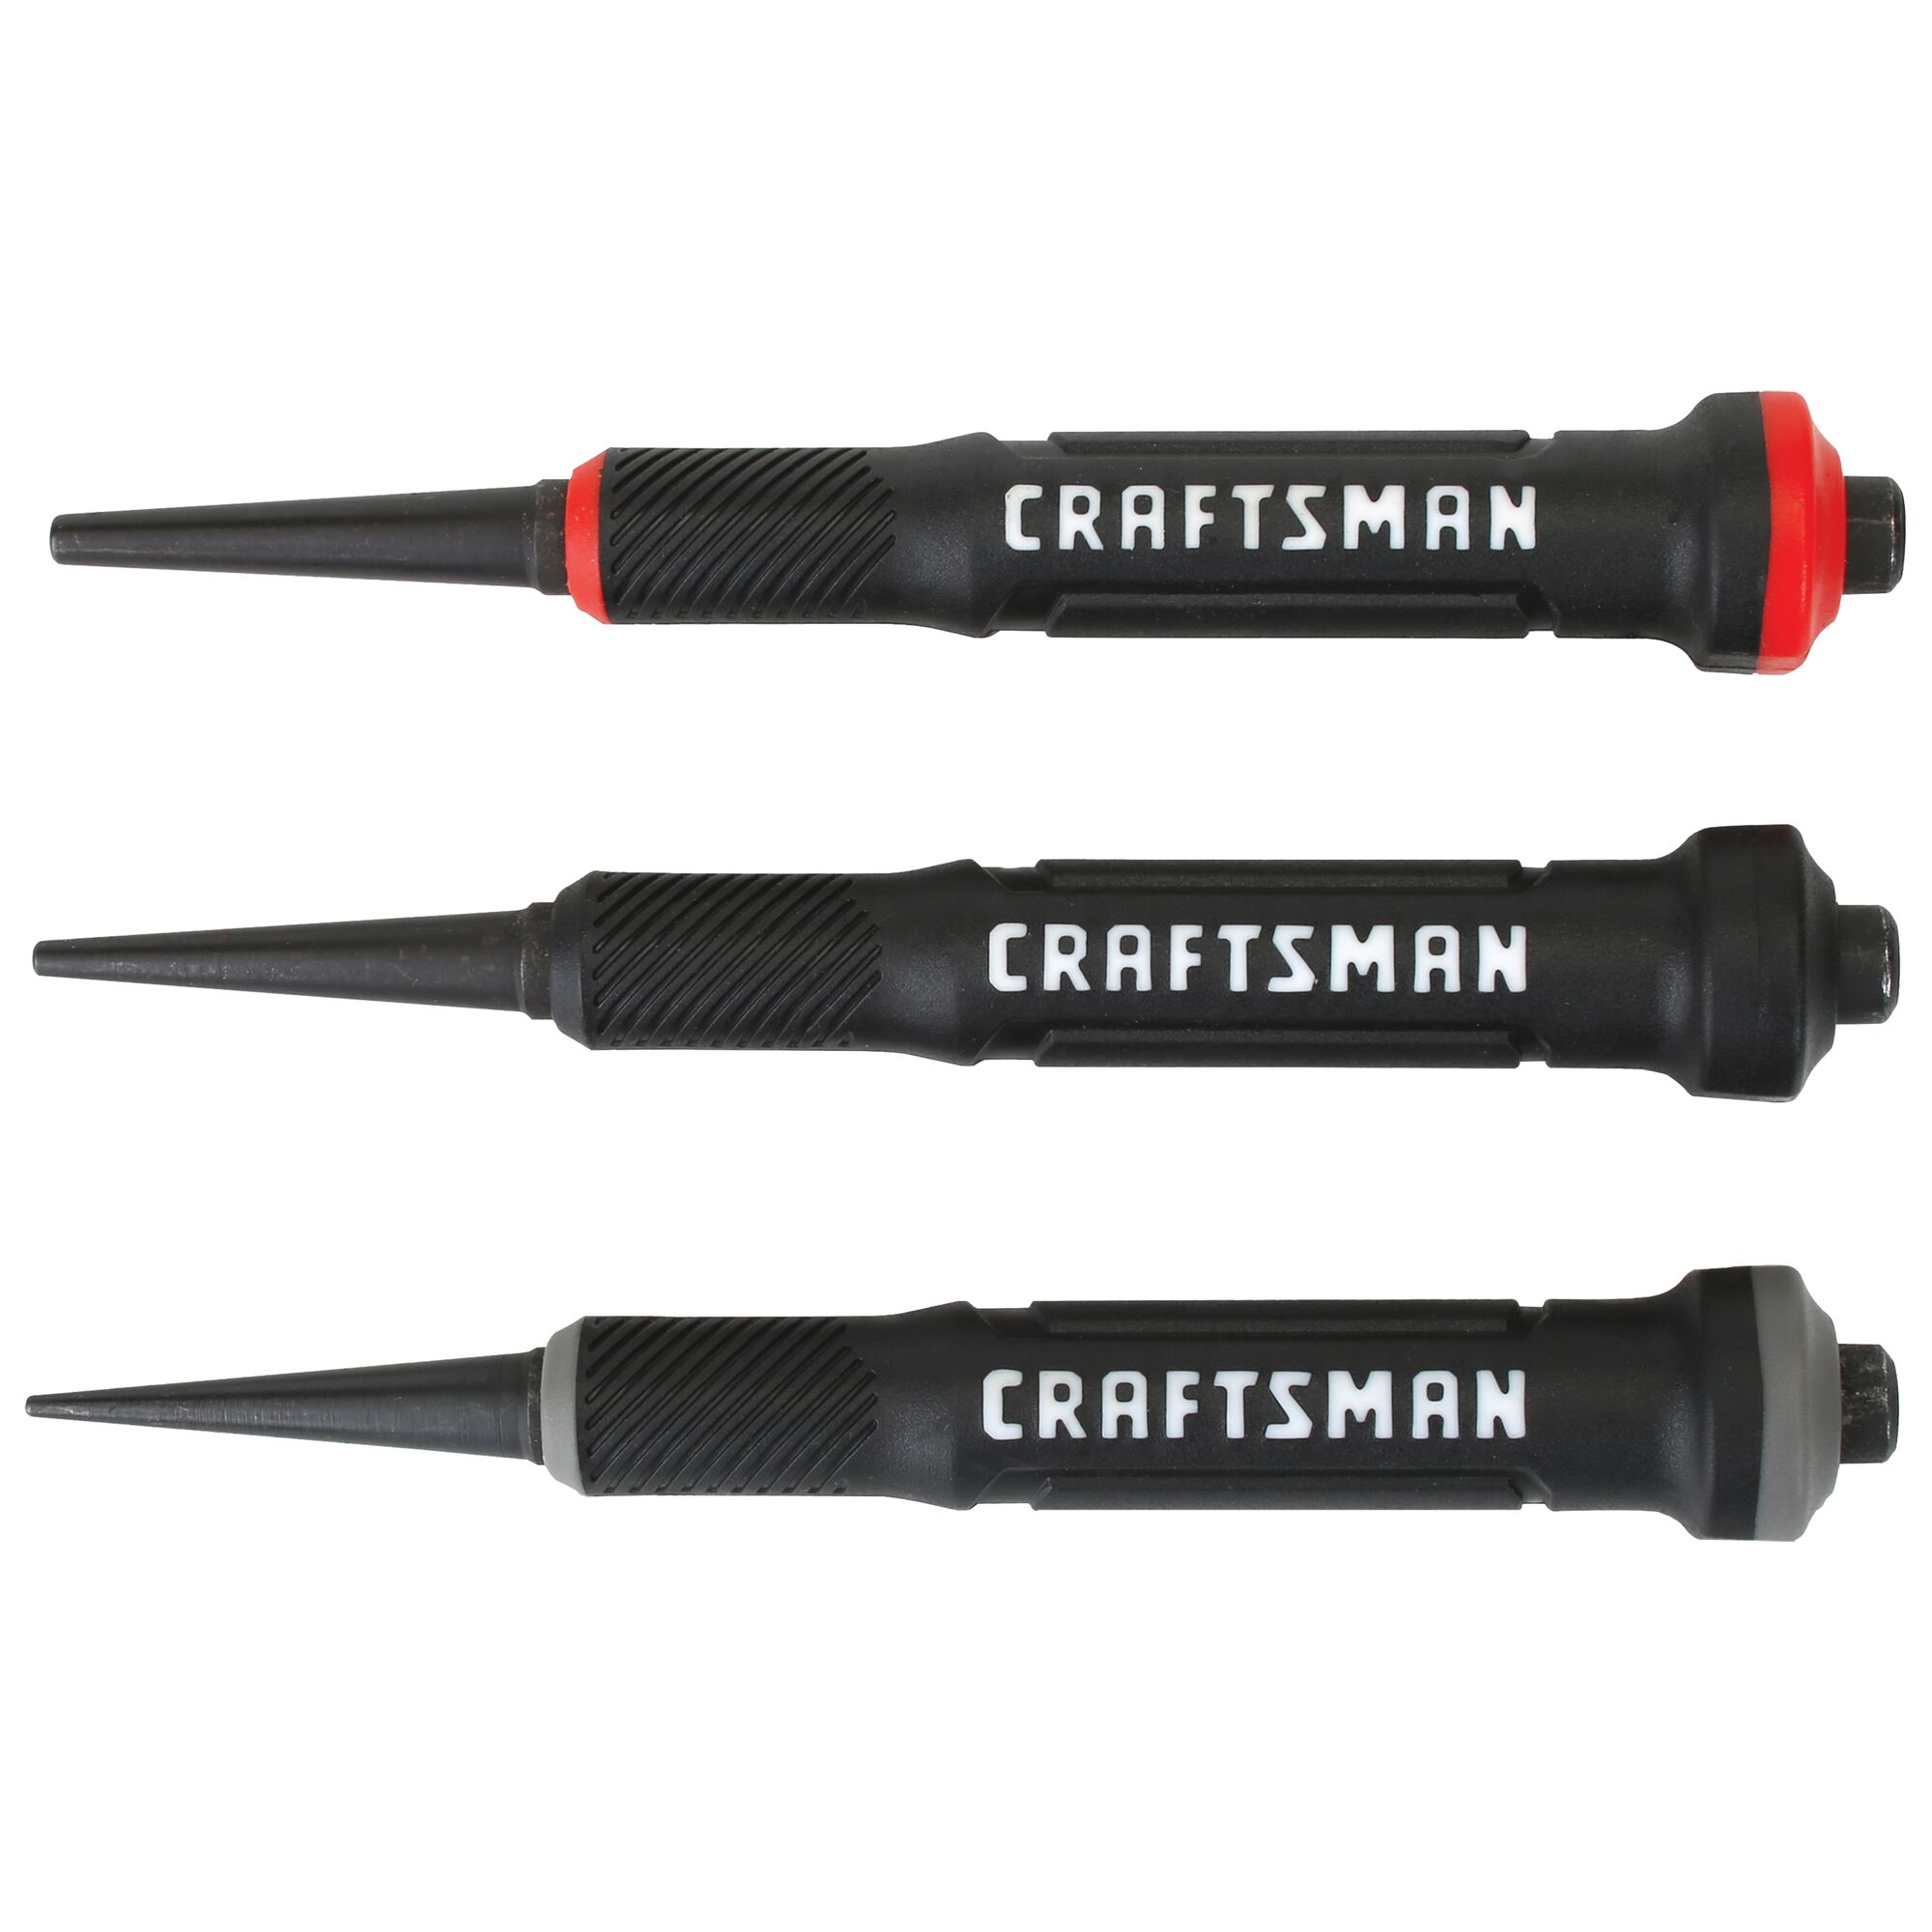 View of CRAFTSMAN Chisels & Punches on white background